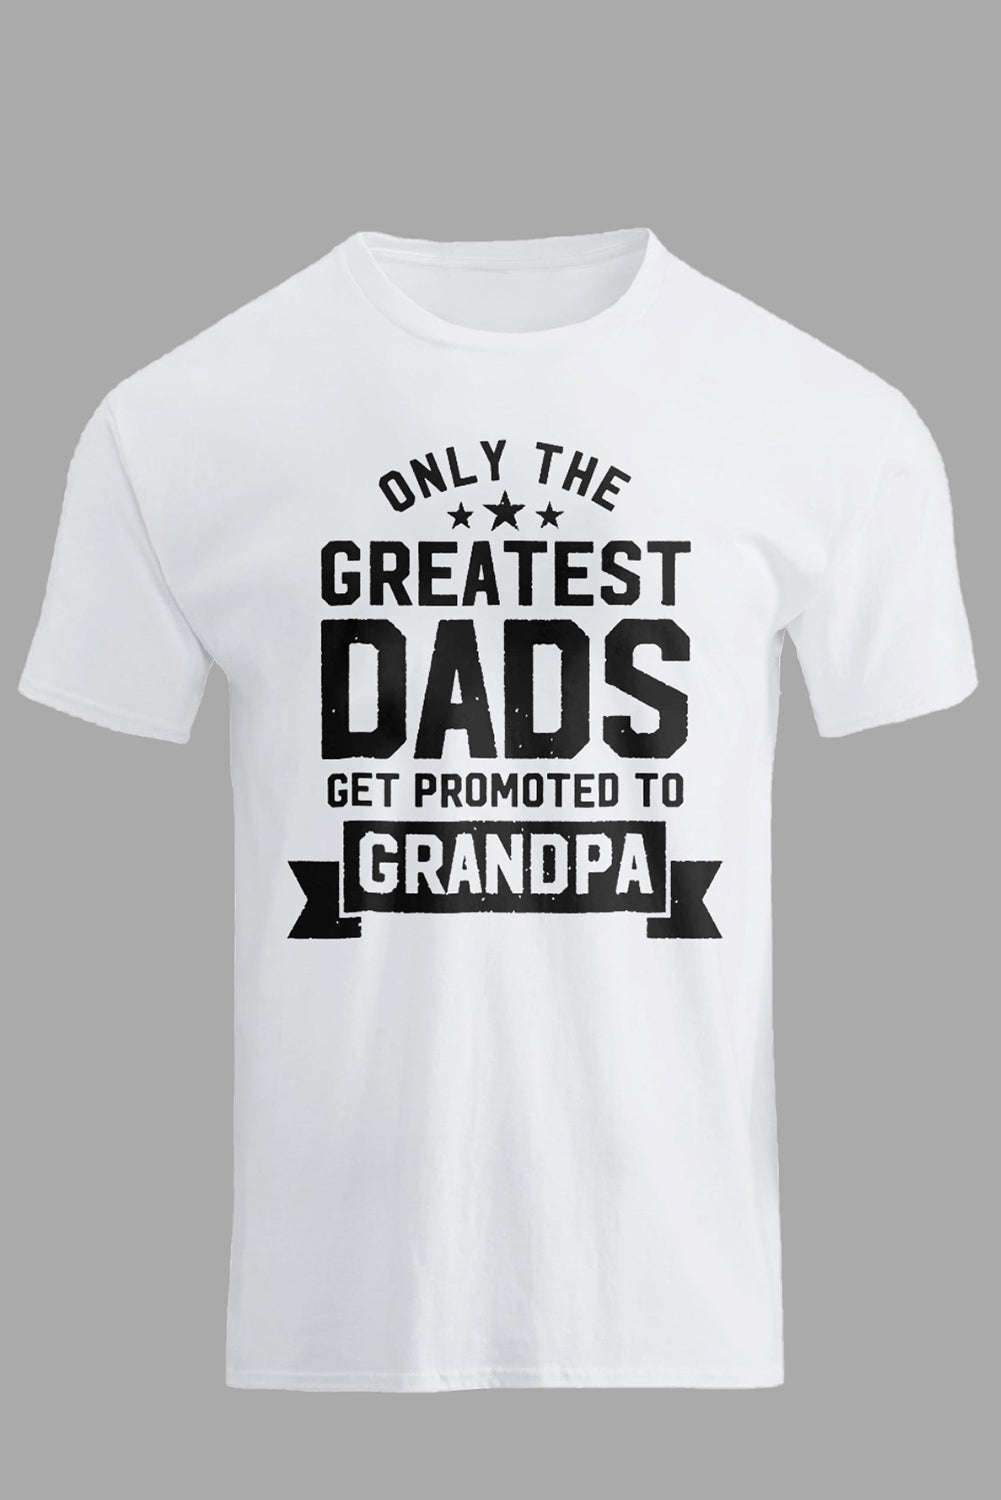 White Great Dads Get Promoted To Grandpa Funny Mens T Shirt White 62%Polyester+32%Cotton+6%Elastane Men's Tops JT's Designer Fashion